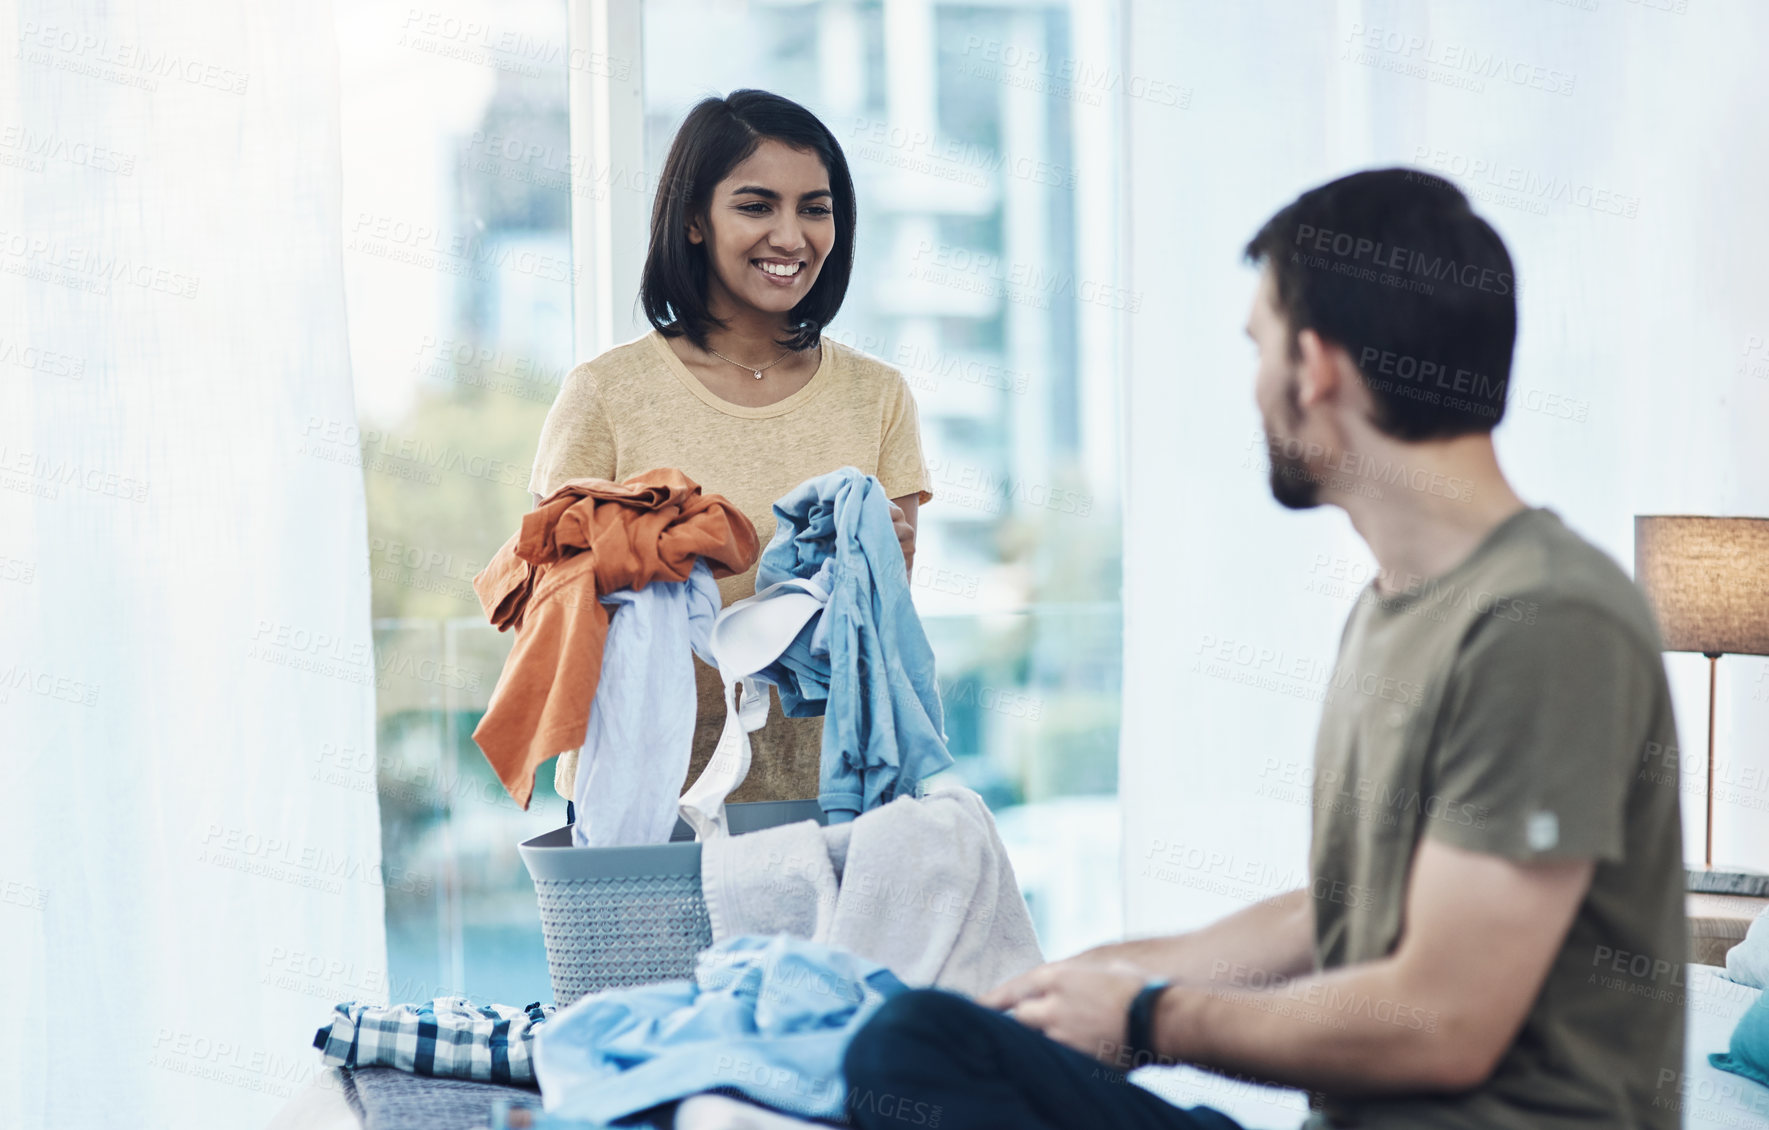 Buy stock photo Shot of a young couple doing laundry together at home